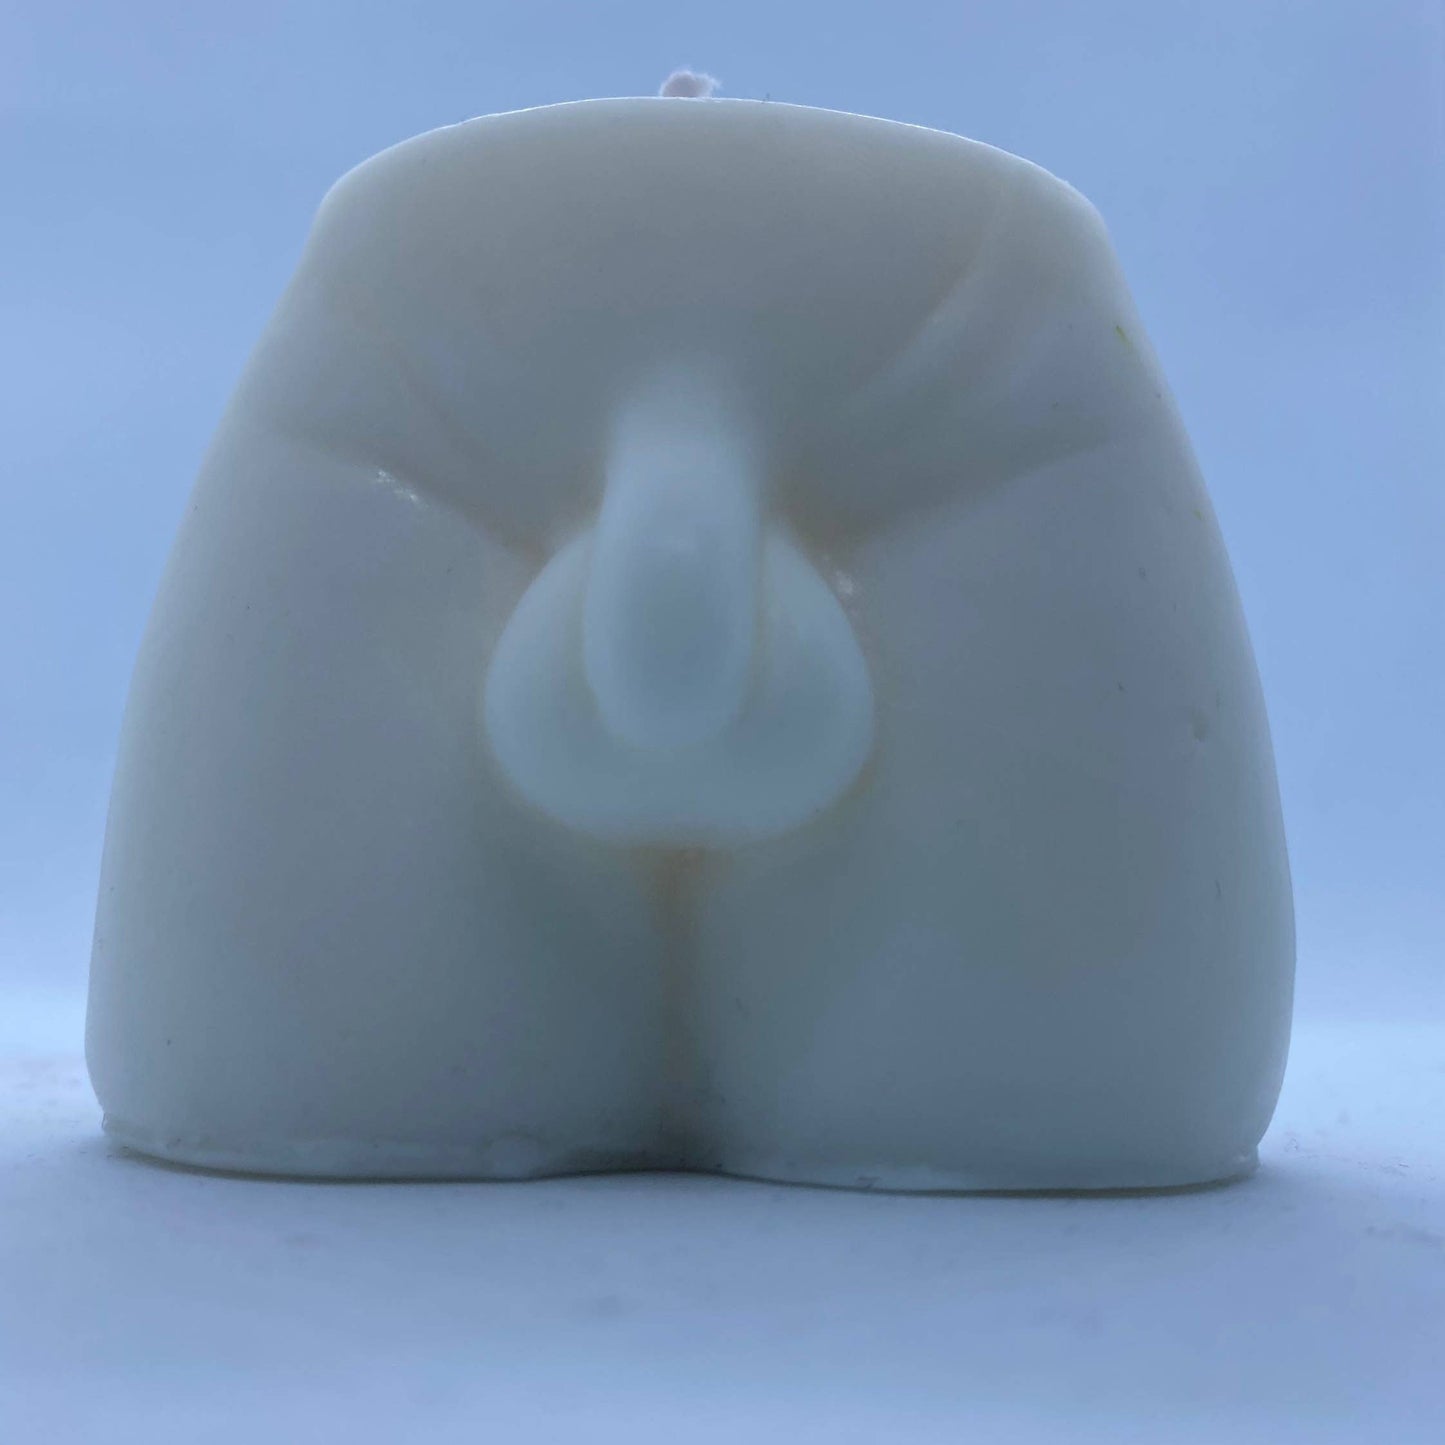 The Male Booty body positive candle, pro body curves candle